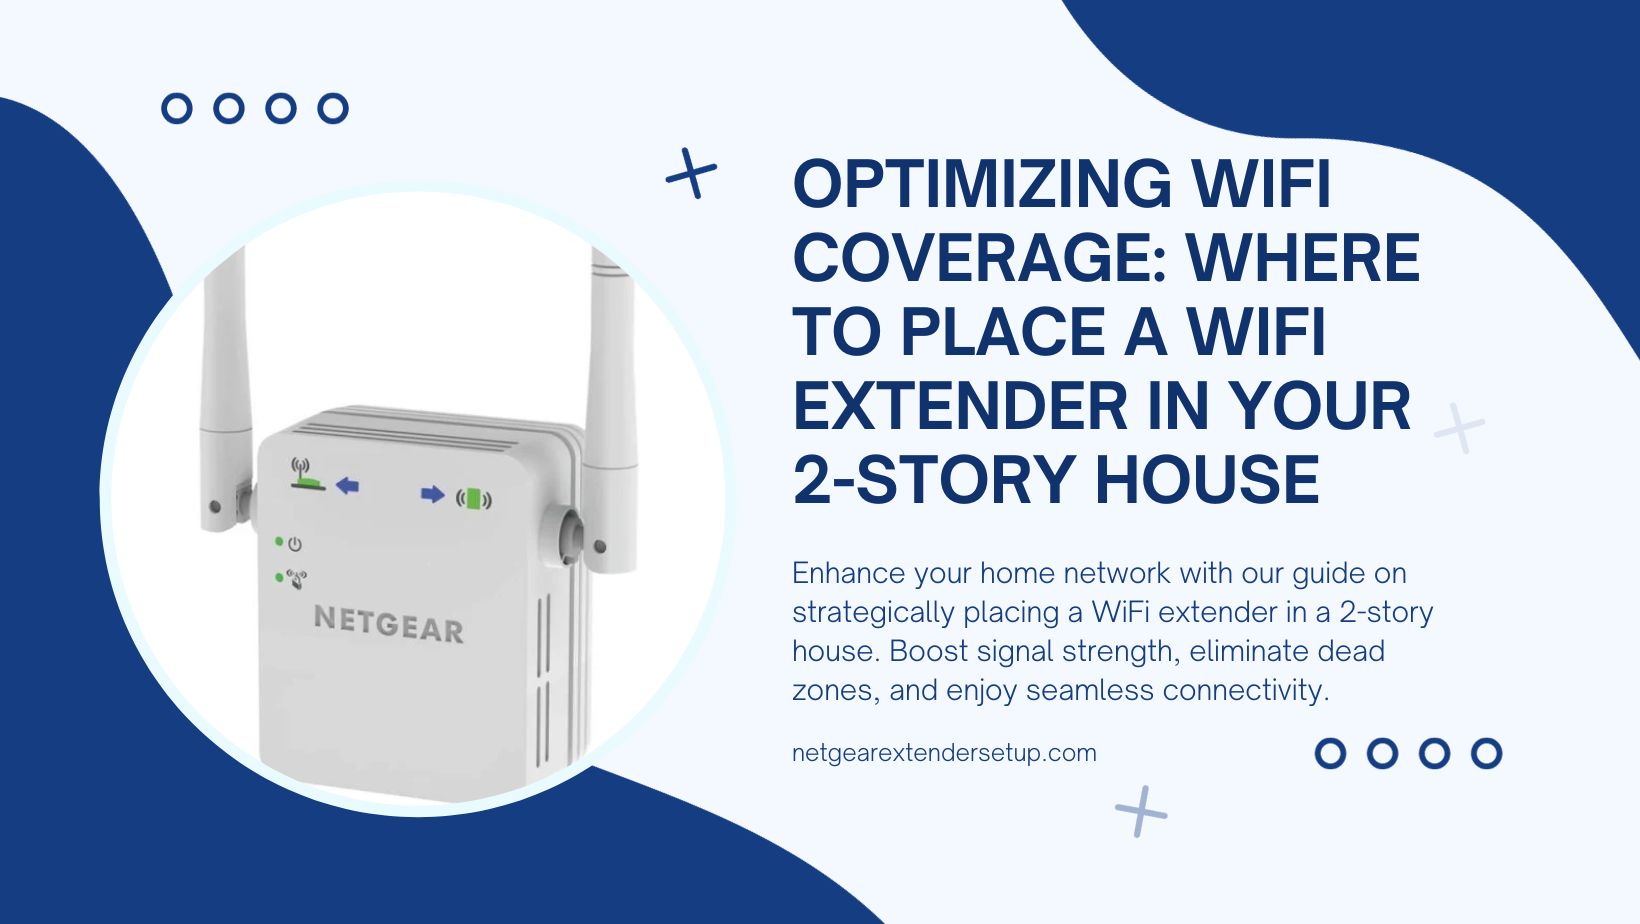 You are currently viewing Optimizing WiFi Coverage: Where to Place WiFi Extender in 2 Story House 